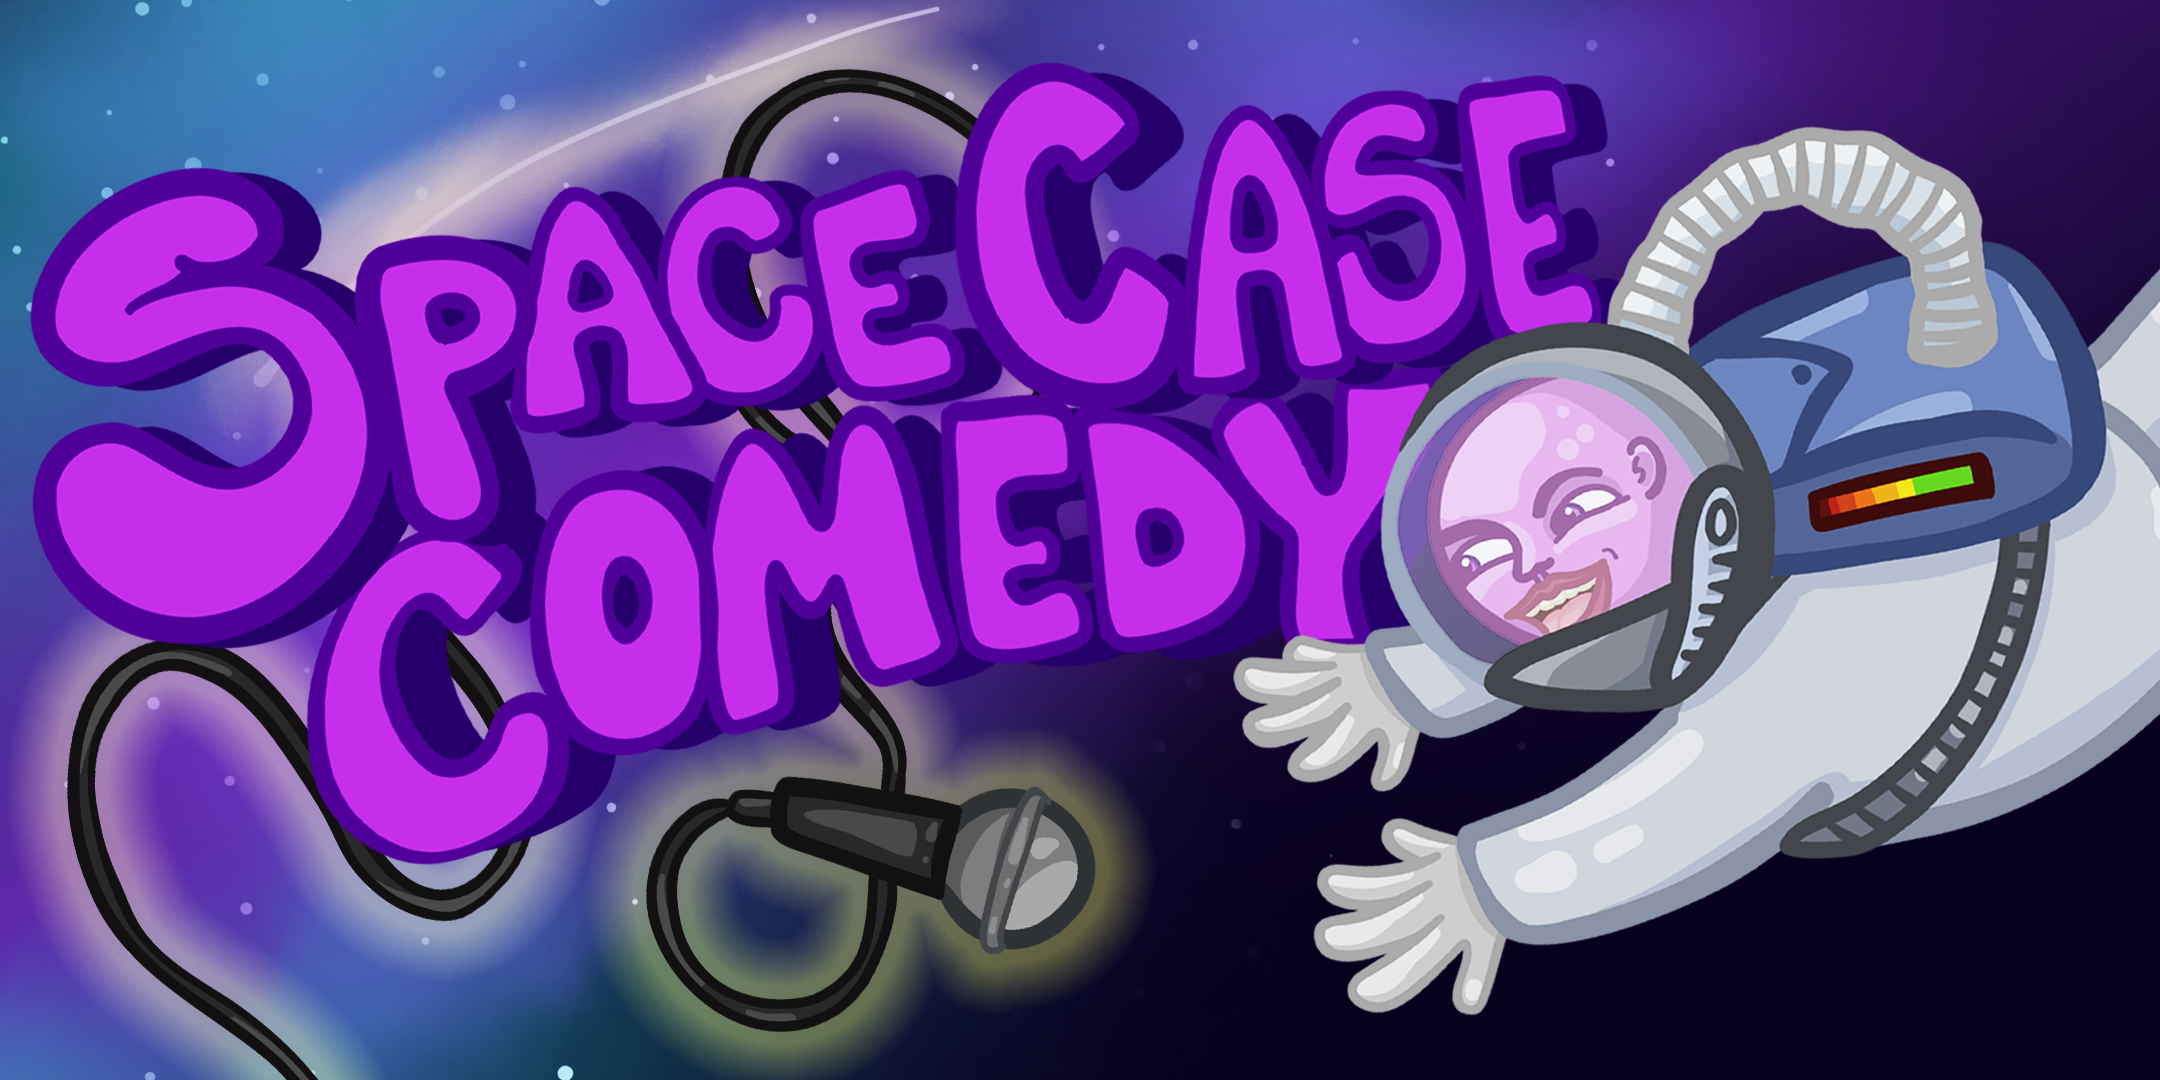 Space Case Comedy | Final Fridays at Spectra Art Space